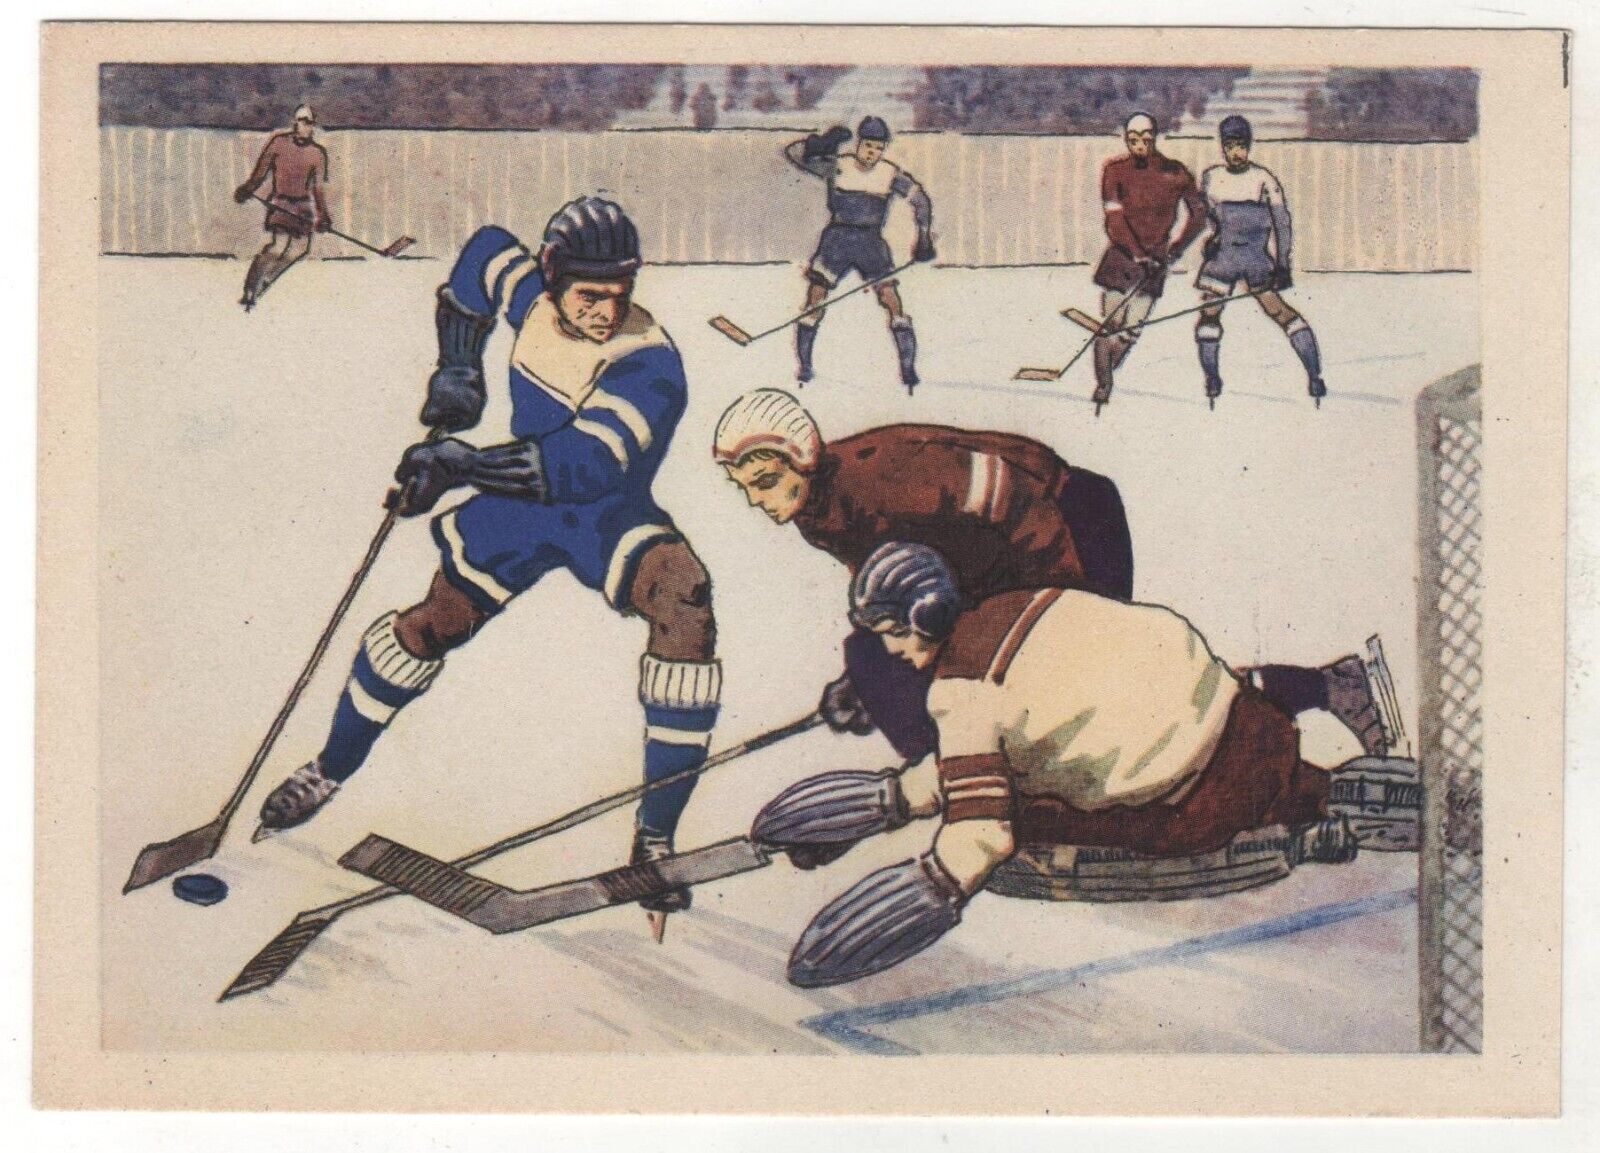 1959 SPORT Hockey players GUY Honored Masters of Sports OLD Russian postcard